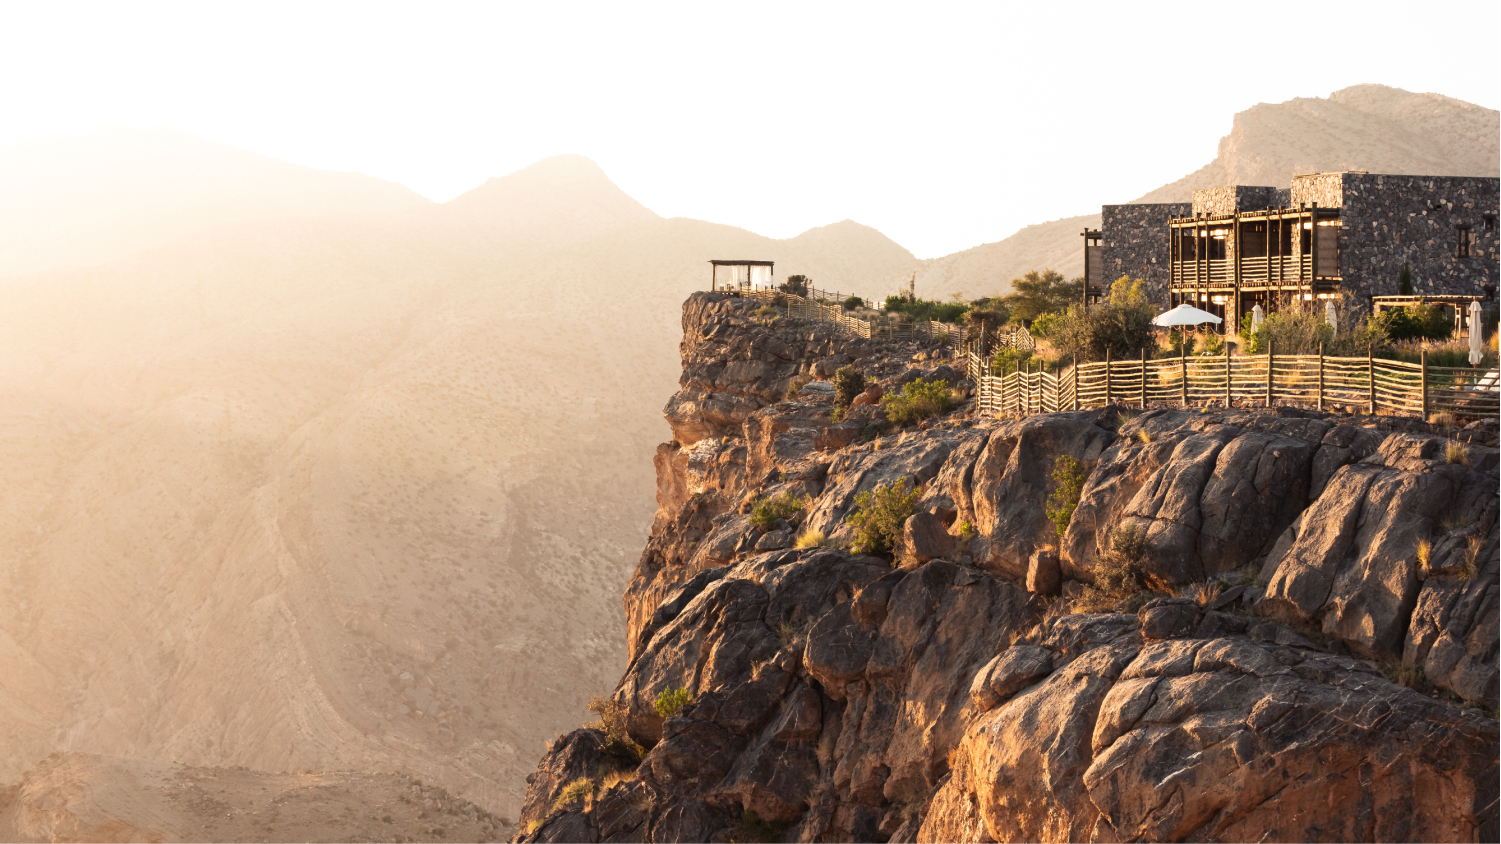 views of the resort and cliffs at sunset